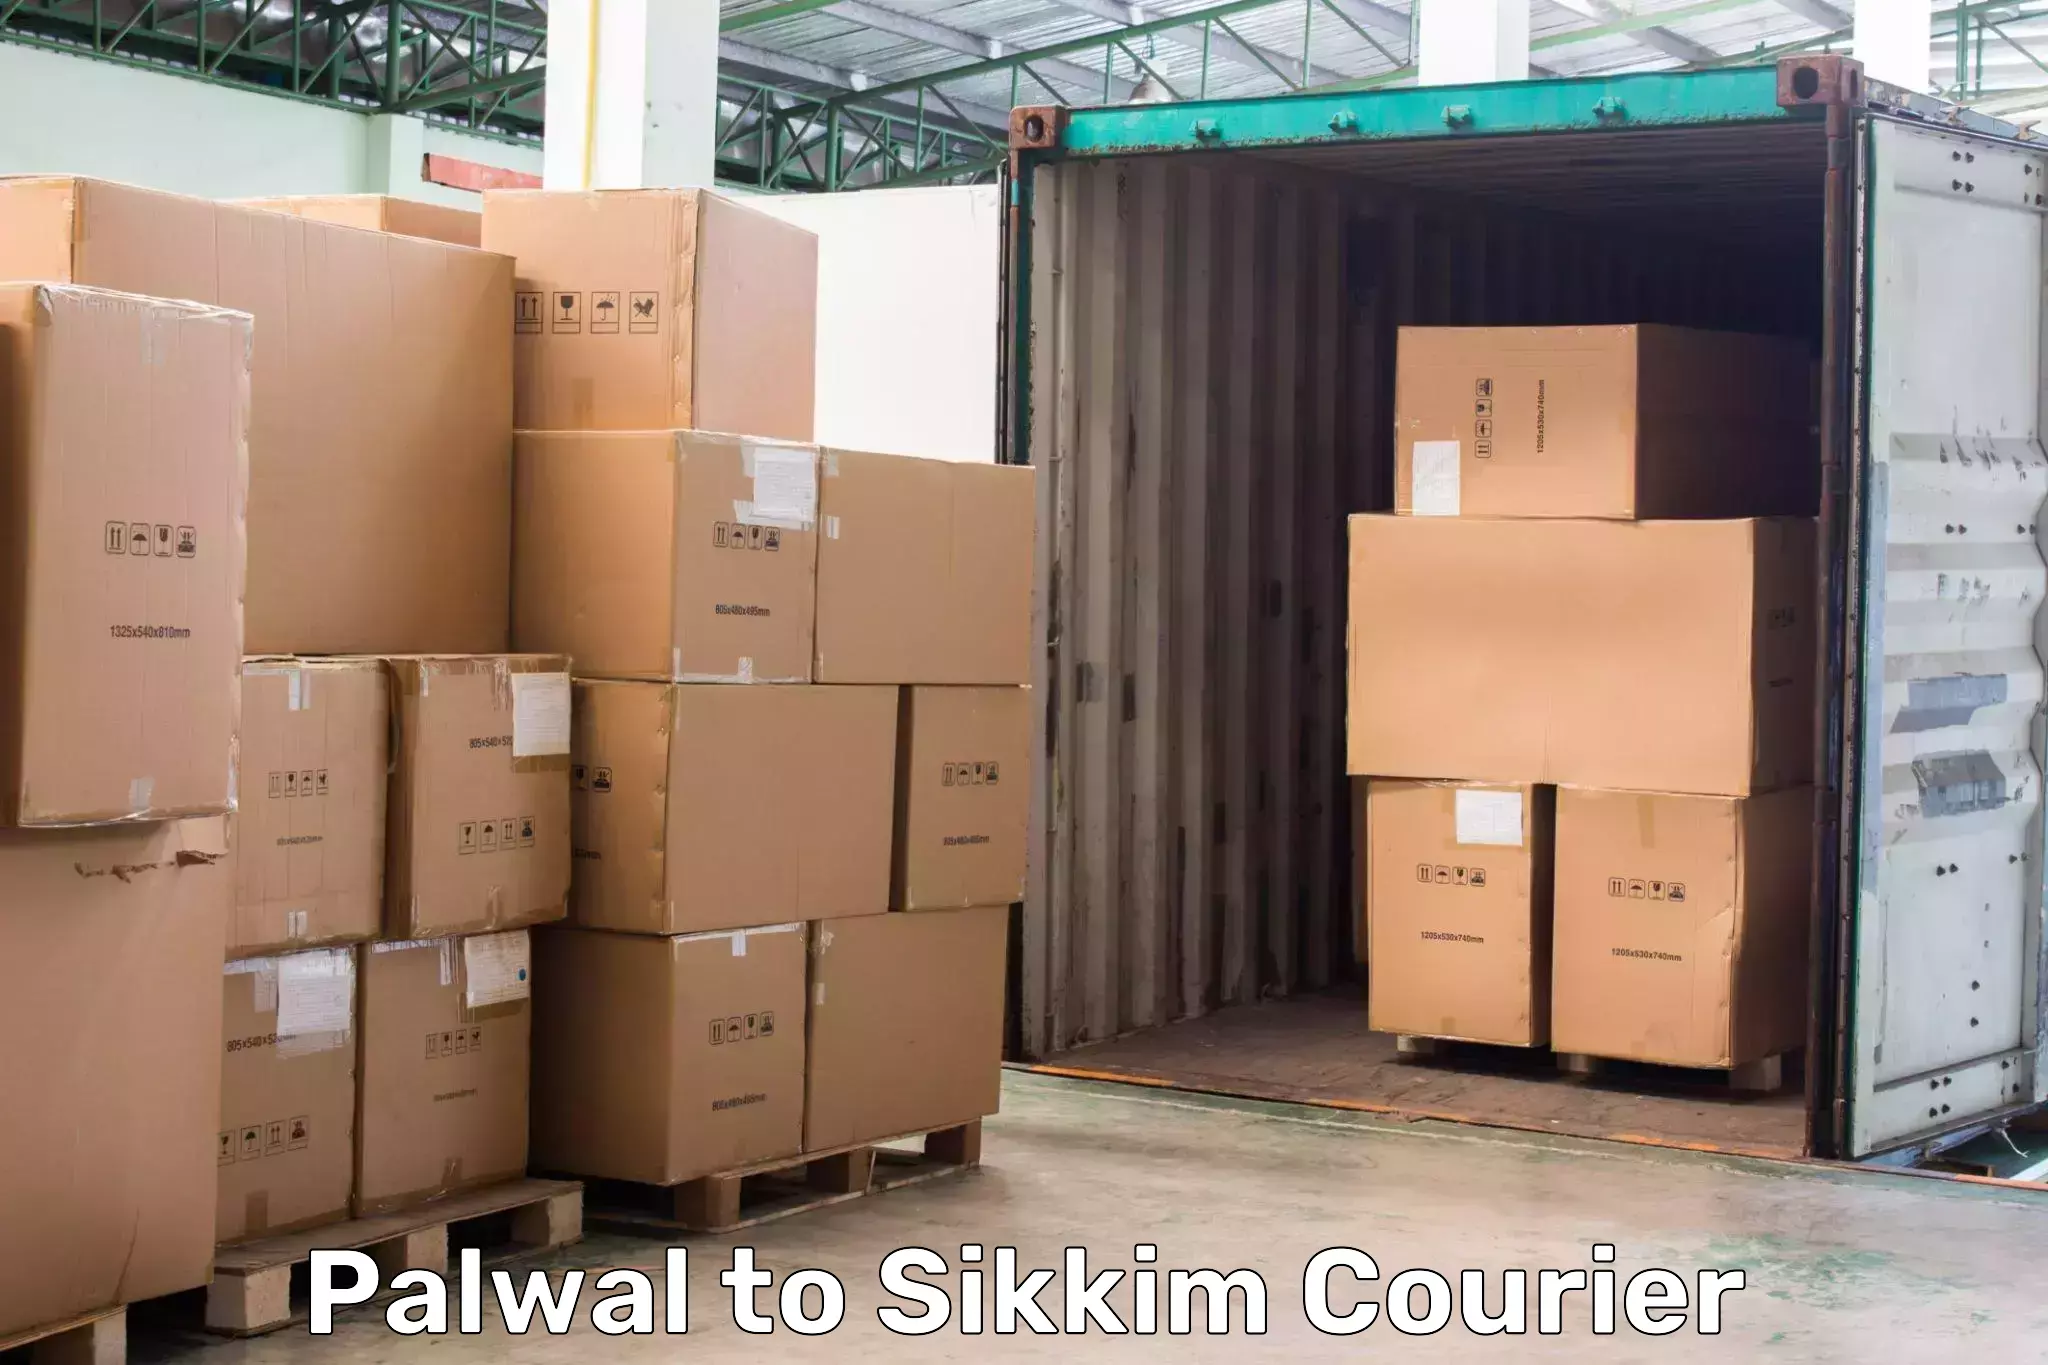 Global shipping networks Palwal to Pelling